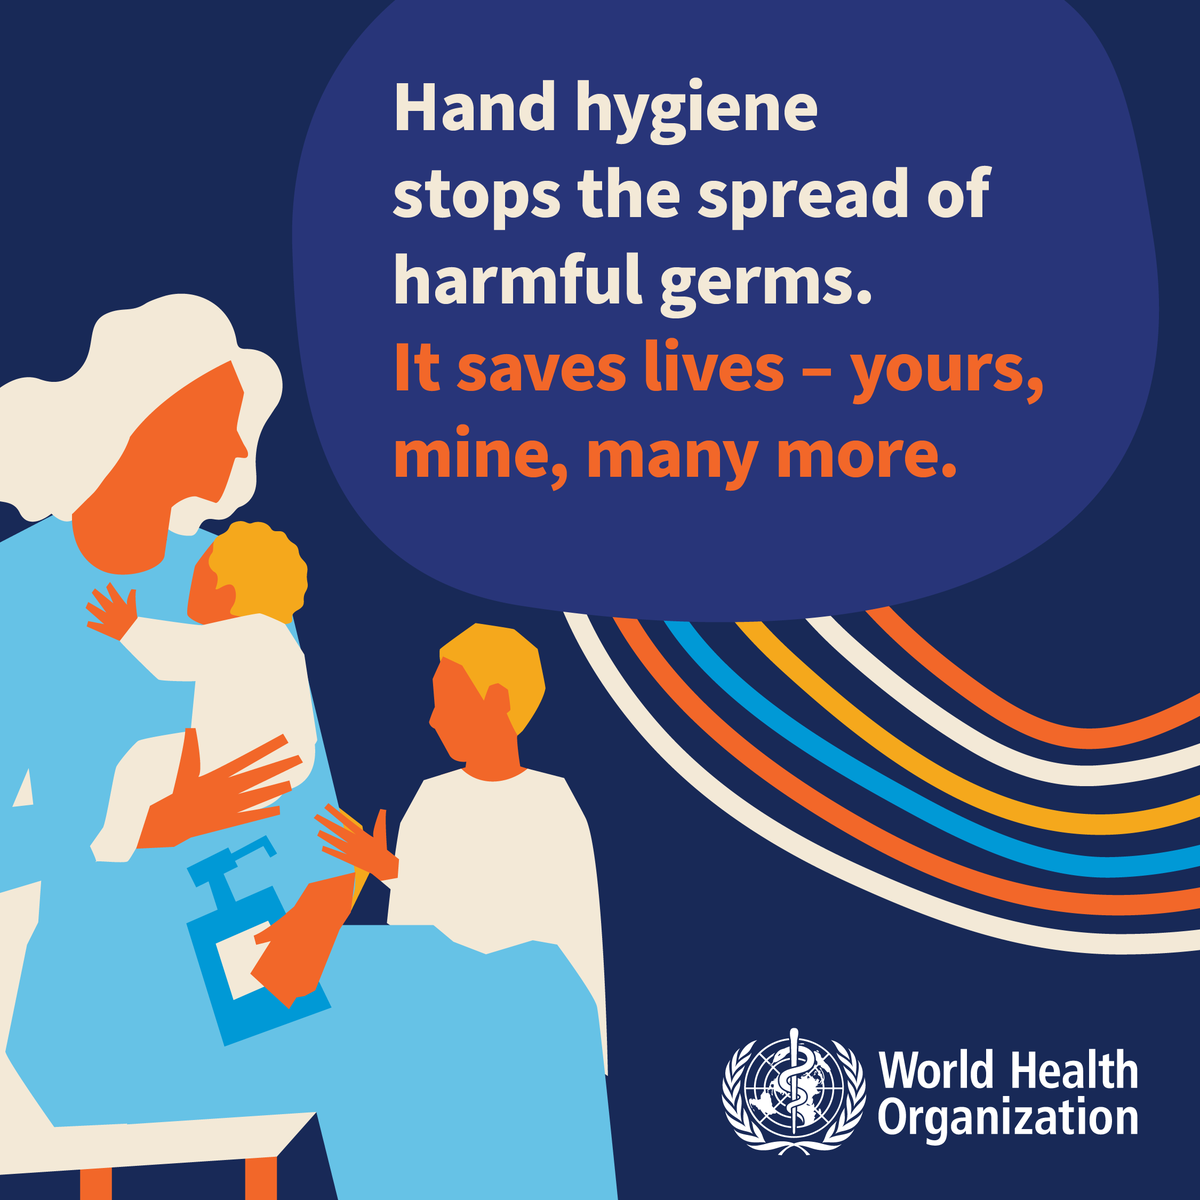 This #WorldHandHygieneDay, let’s focus on its vital role in rural health, where resources are often limited. Proper hand hygiene prevents infections and protects everyone—healthcare workers and patients alike. Let's commit to cleanliness to stop germs and save lives! #RuralHealth